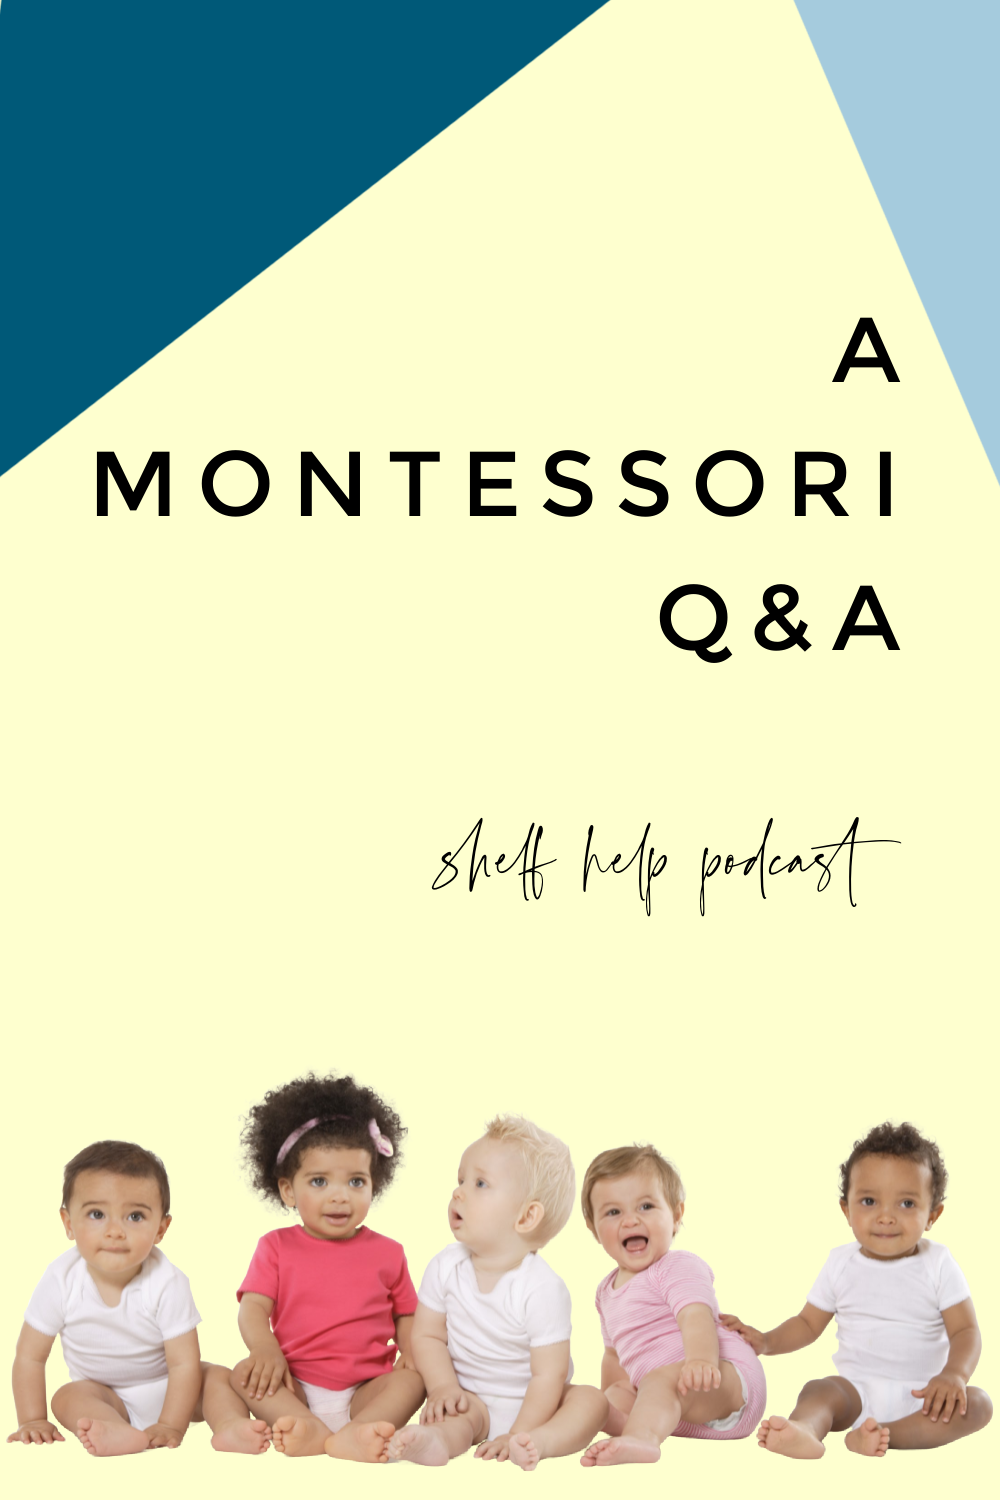 In this Montessori parenting podcast we answer a series of frequently asked questions by other Montessori parents about a variety of parenting topics.